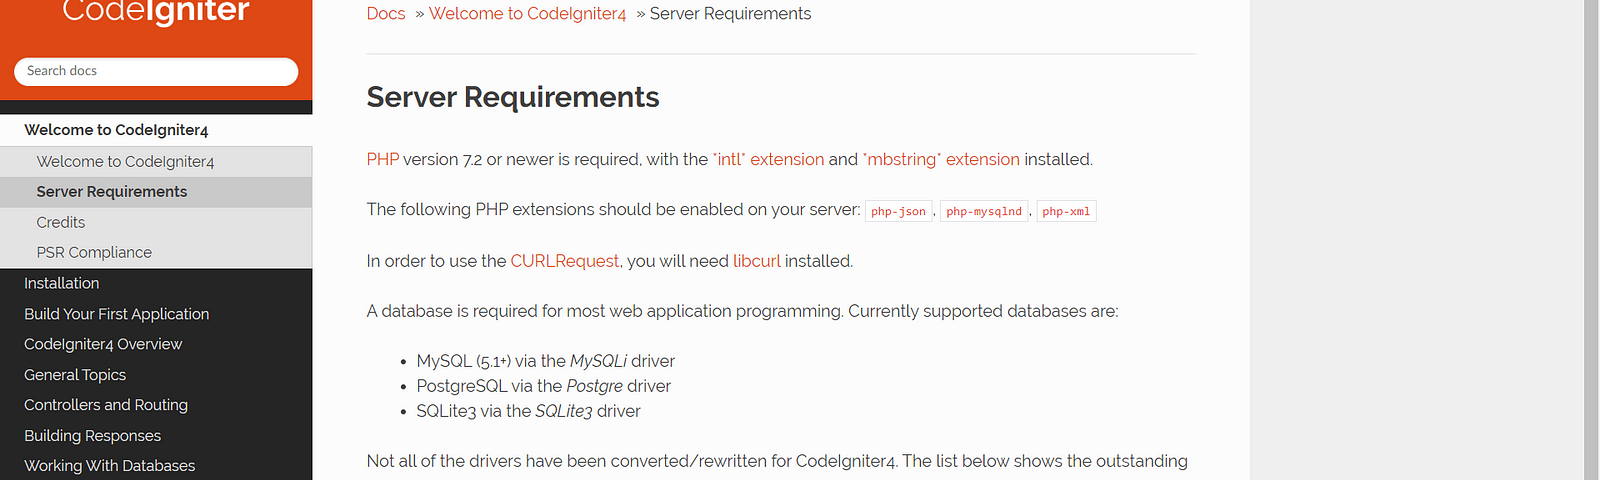 CodeIgniter 4 Server Requirements to run on the local PC